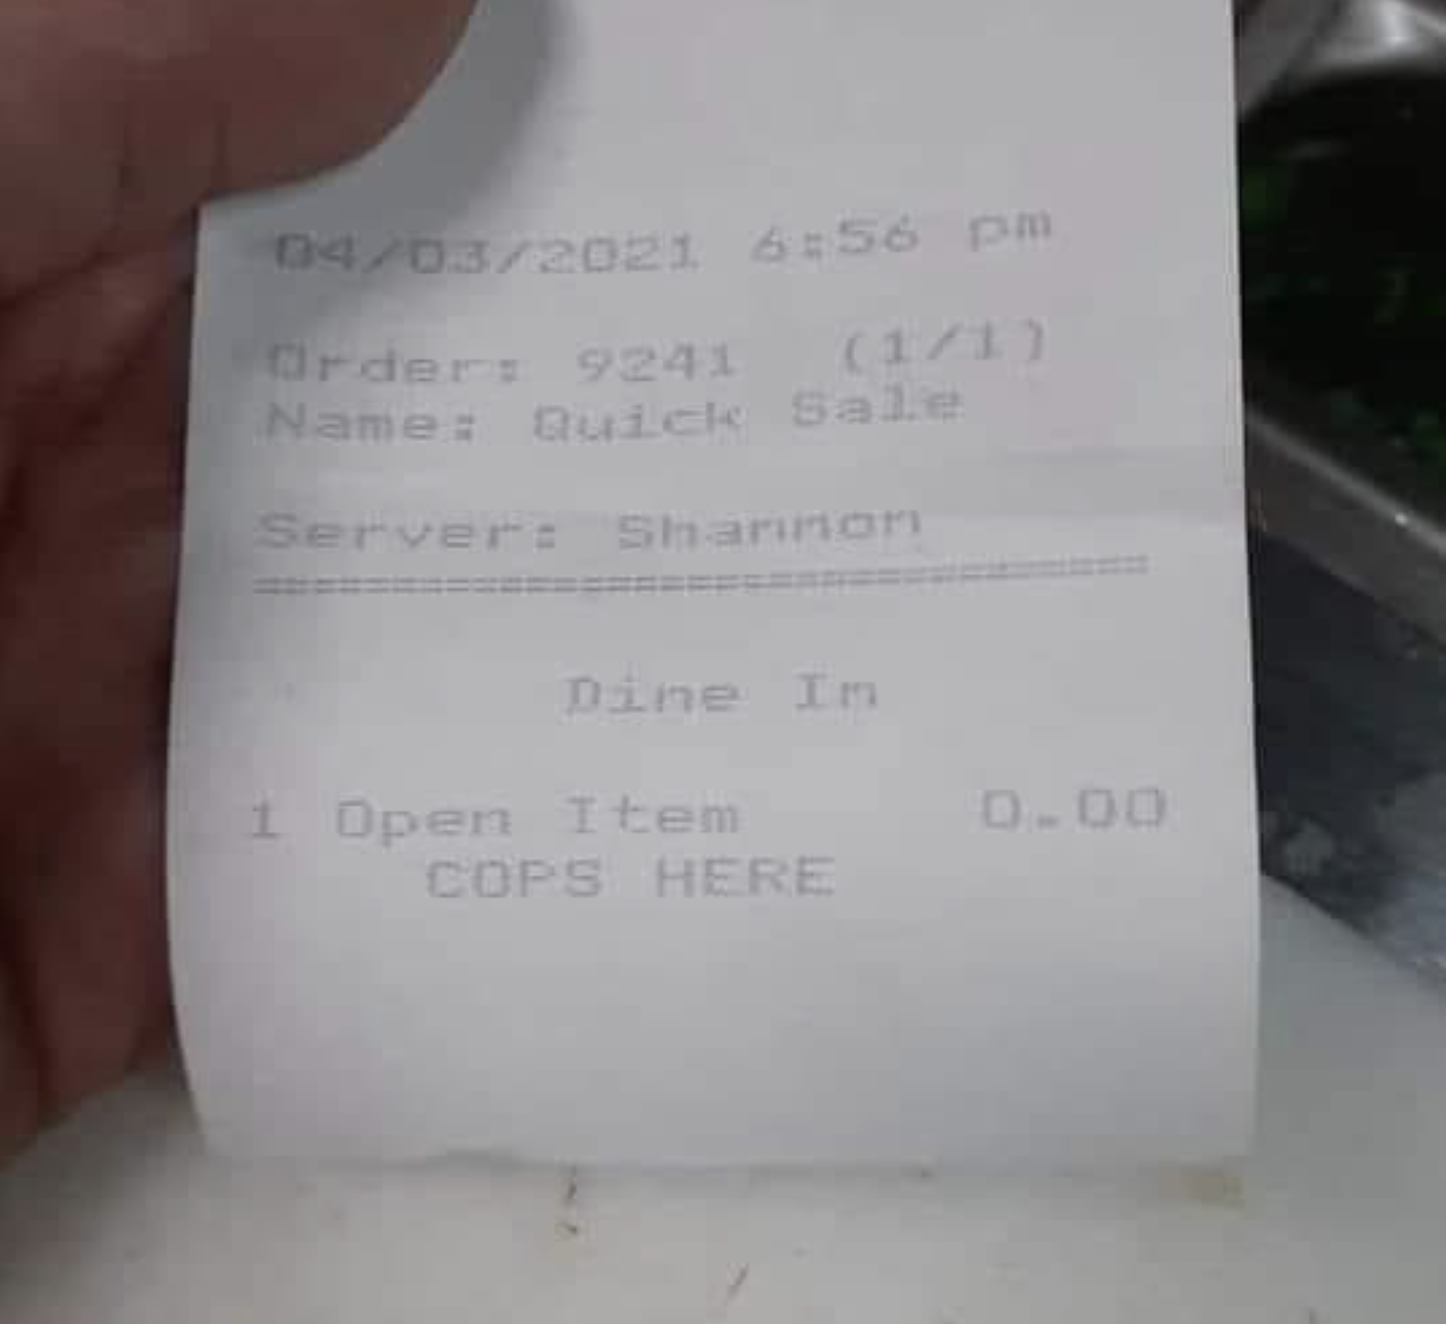 A receipt with. message at bottom: &quot;COPS HERE&quot;